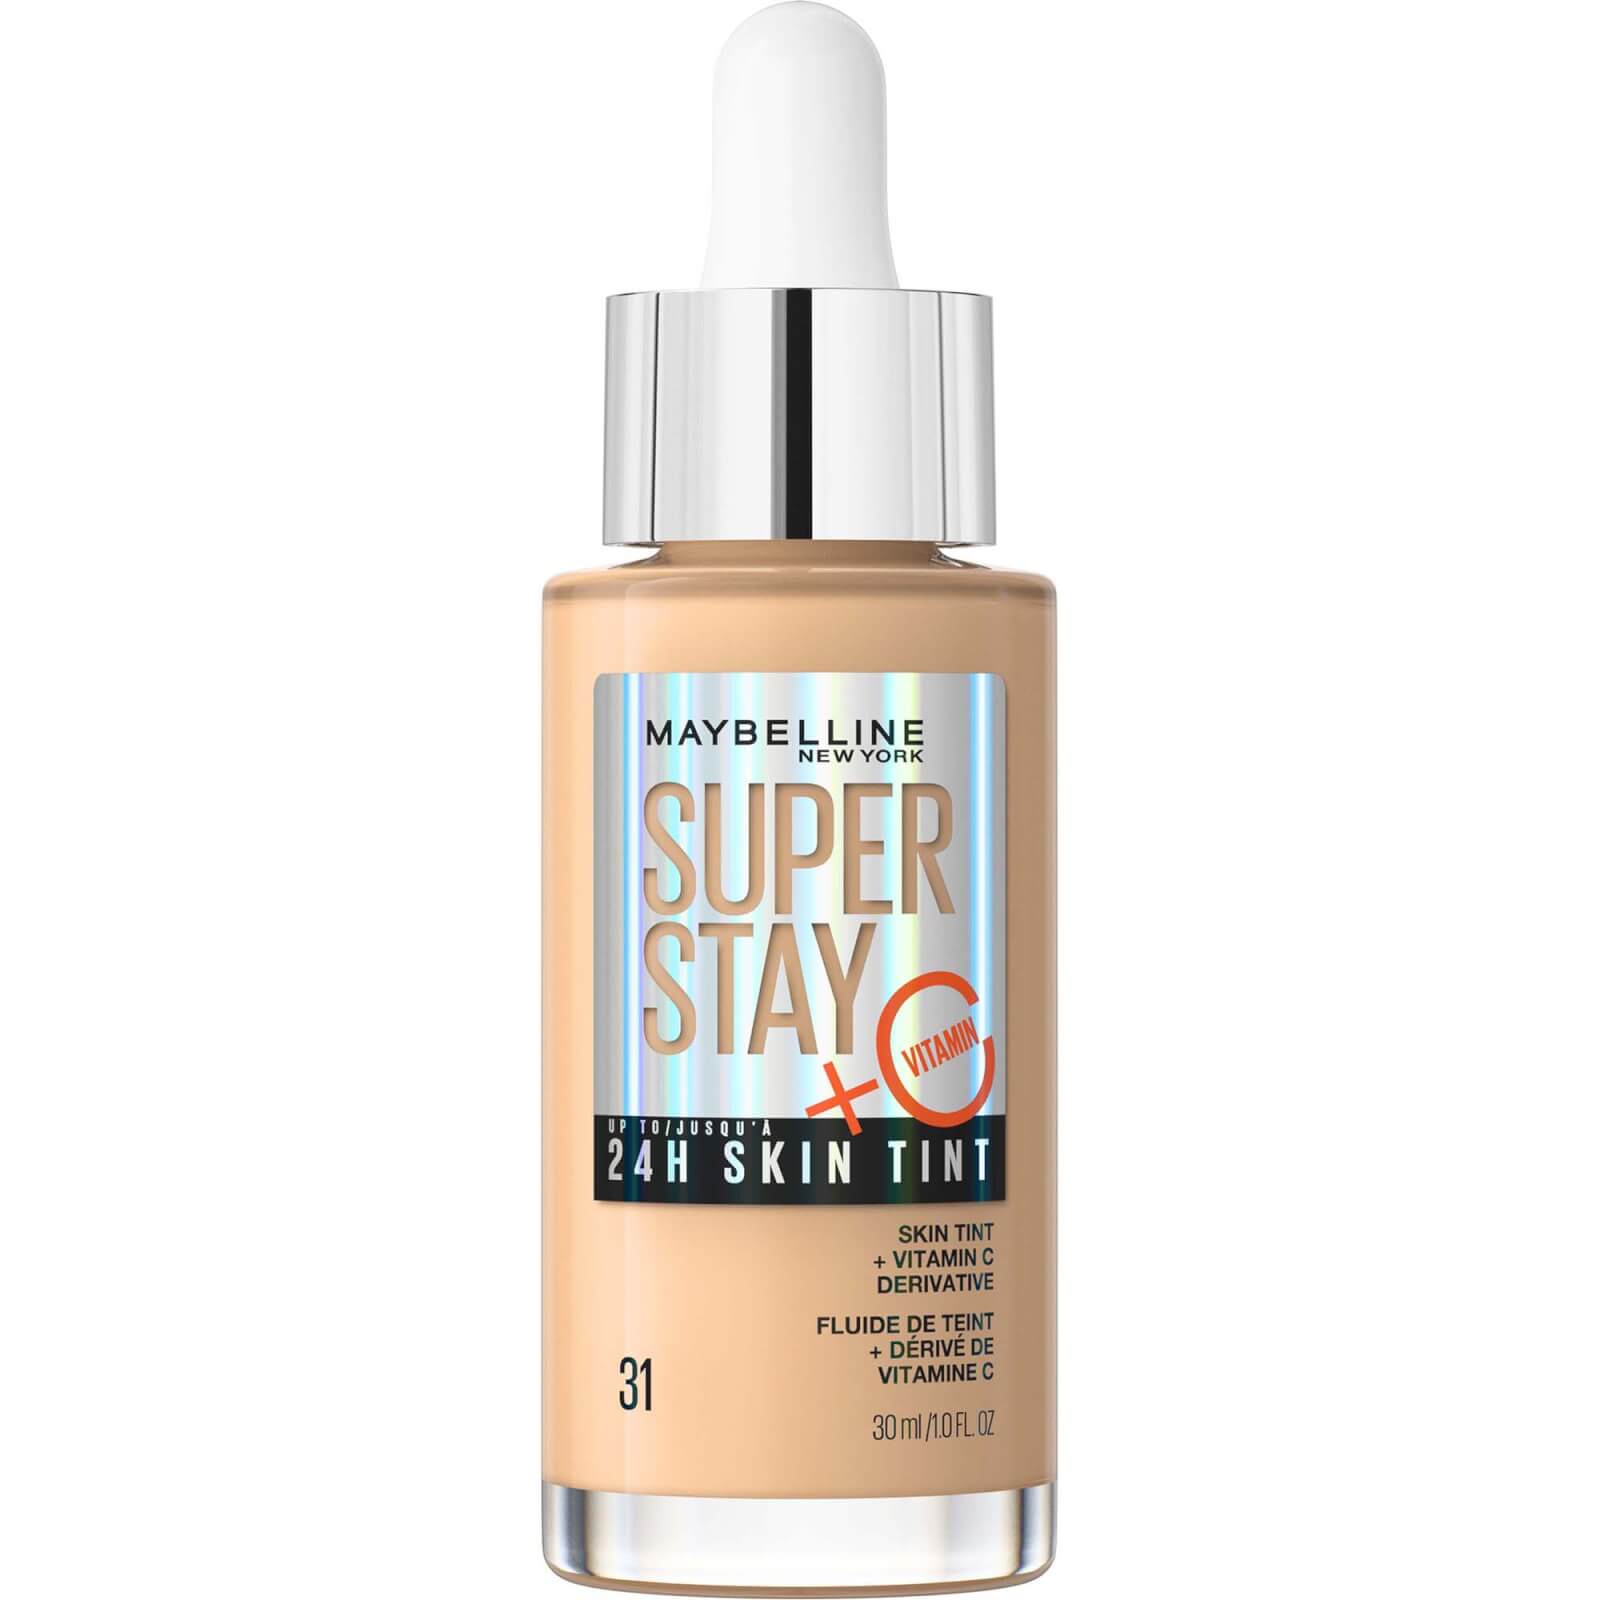 Maybelline Super Stay Up To 24h Skin Tint Foundation + Vitamin C 30ml (various Shades) - 31 In Neutral